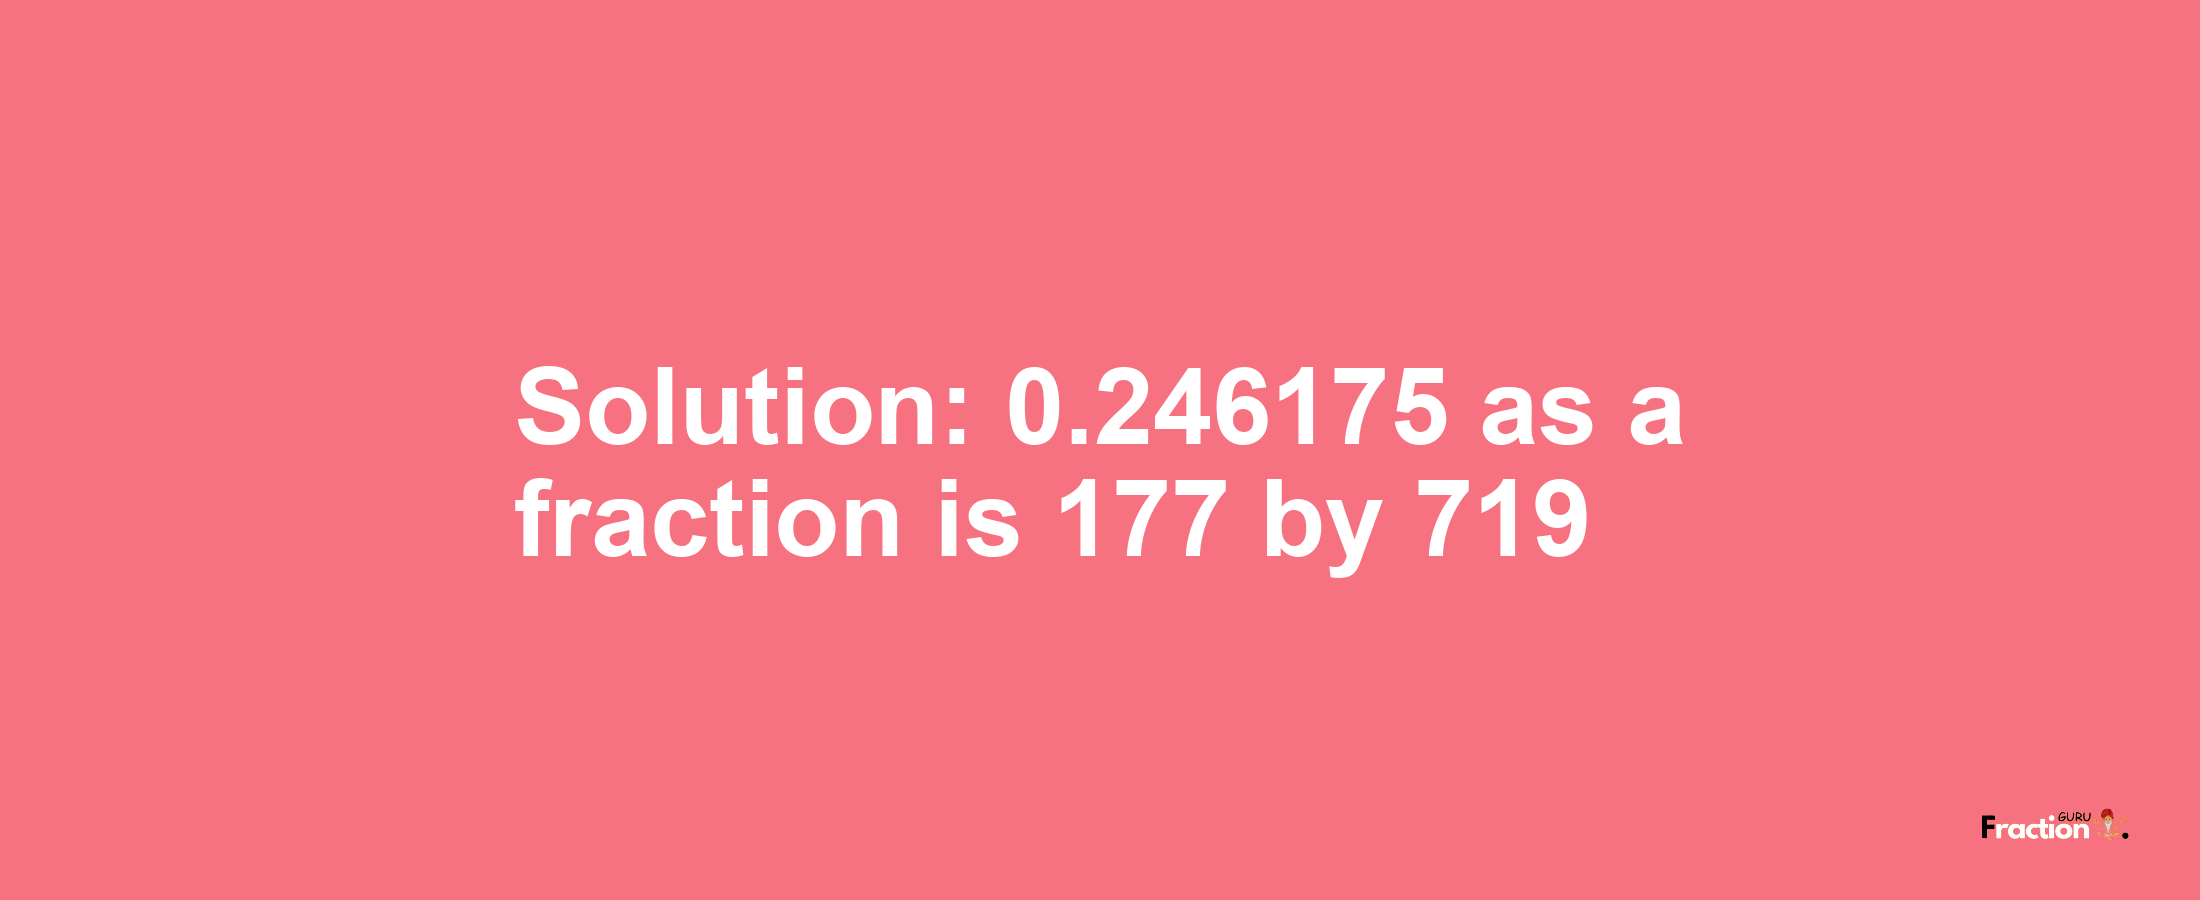 Solution:0.246175 as a fraction is 177/719